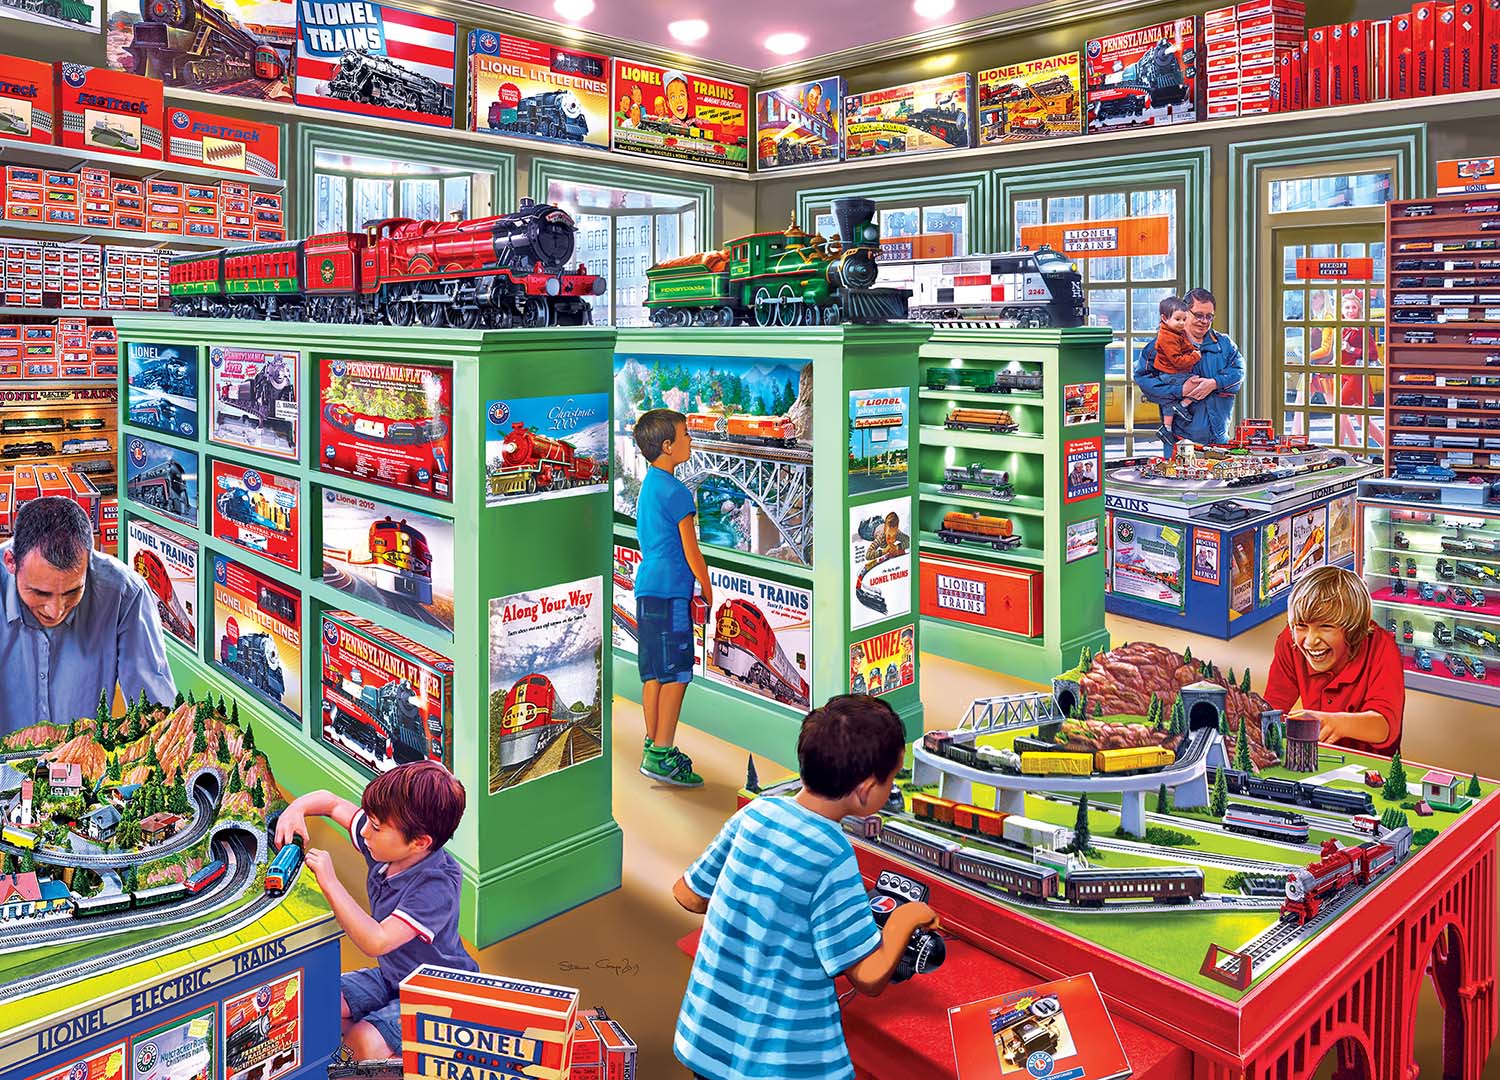 The Lionel Store Train Jigsaw Puzzle